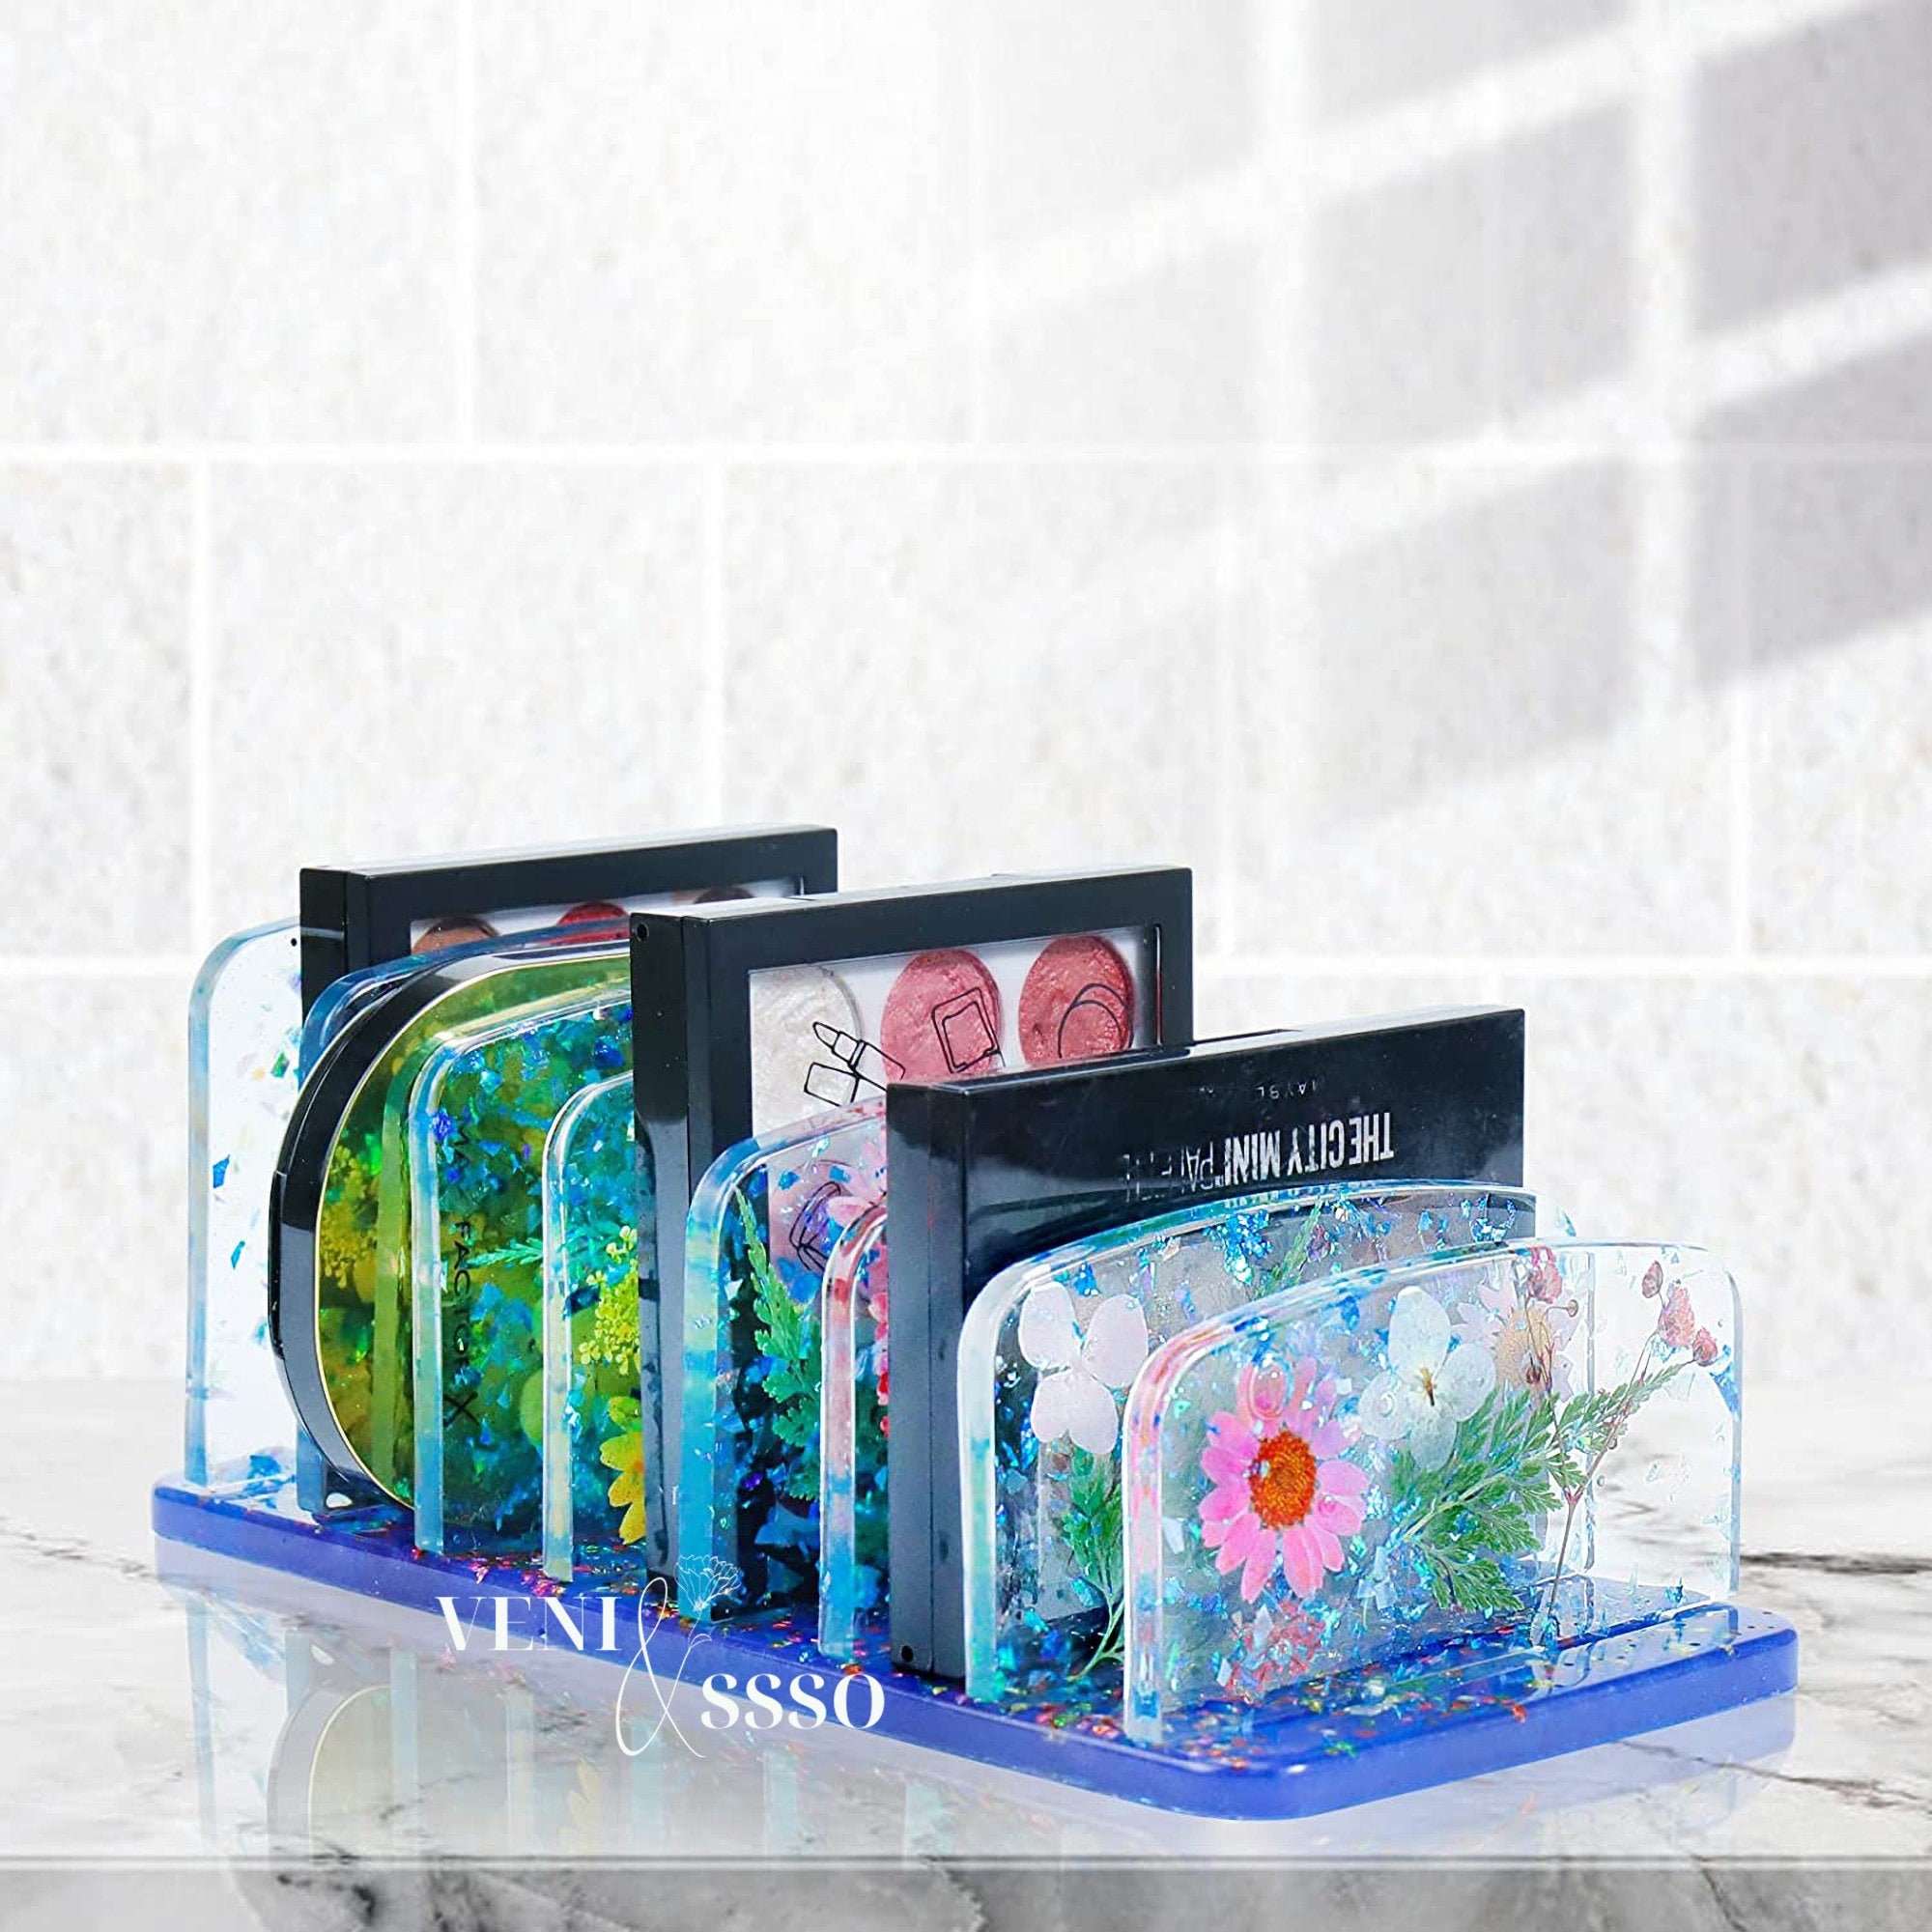 iSuperb Resin Molds, Makeup Brush Storage Molds, Silicone Box Mold with 23-Slot Epoxy Casting Resin Unique Makeup Organizer Trinket Container Epoxy